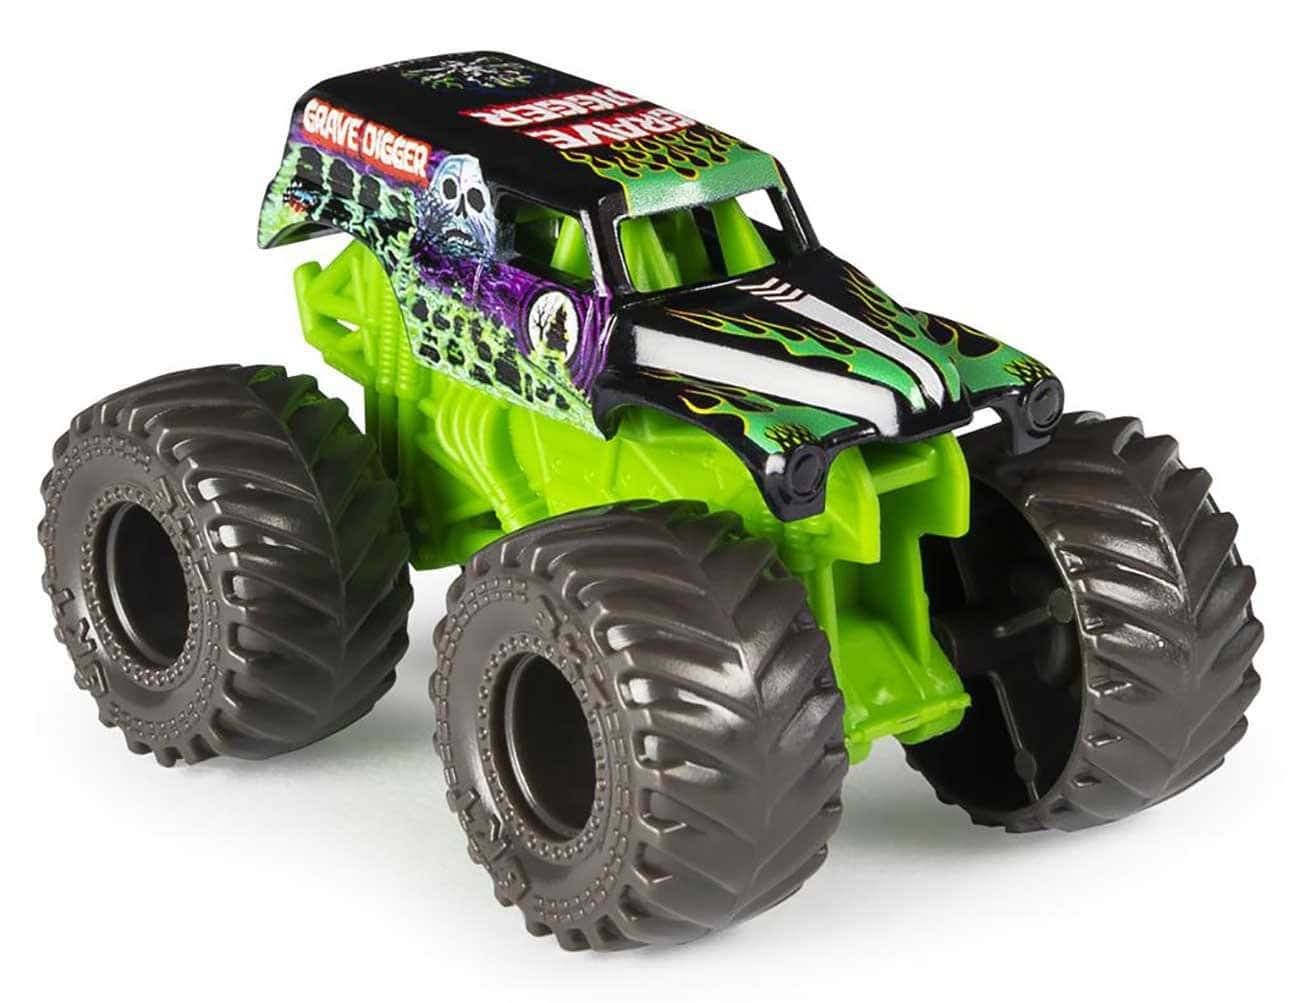 Grave Digger Monster Truck Toy Picture